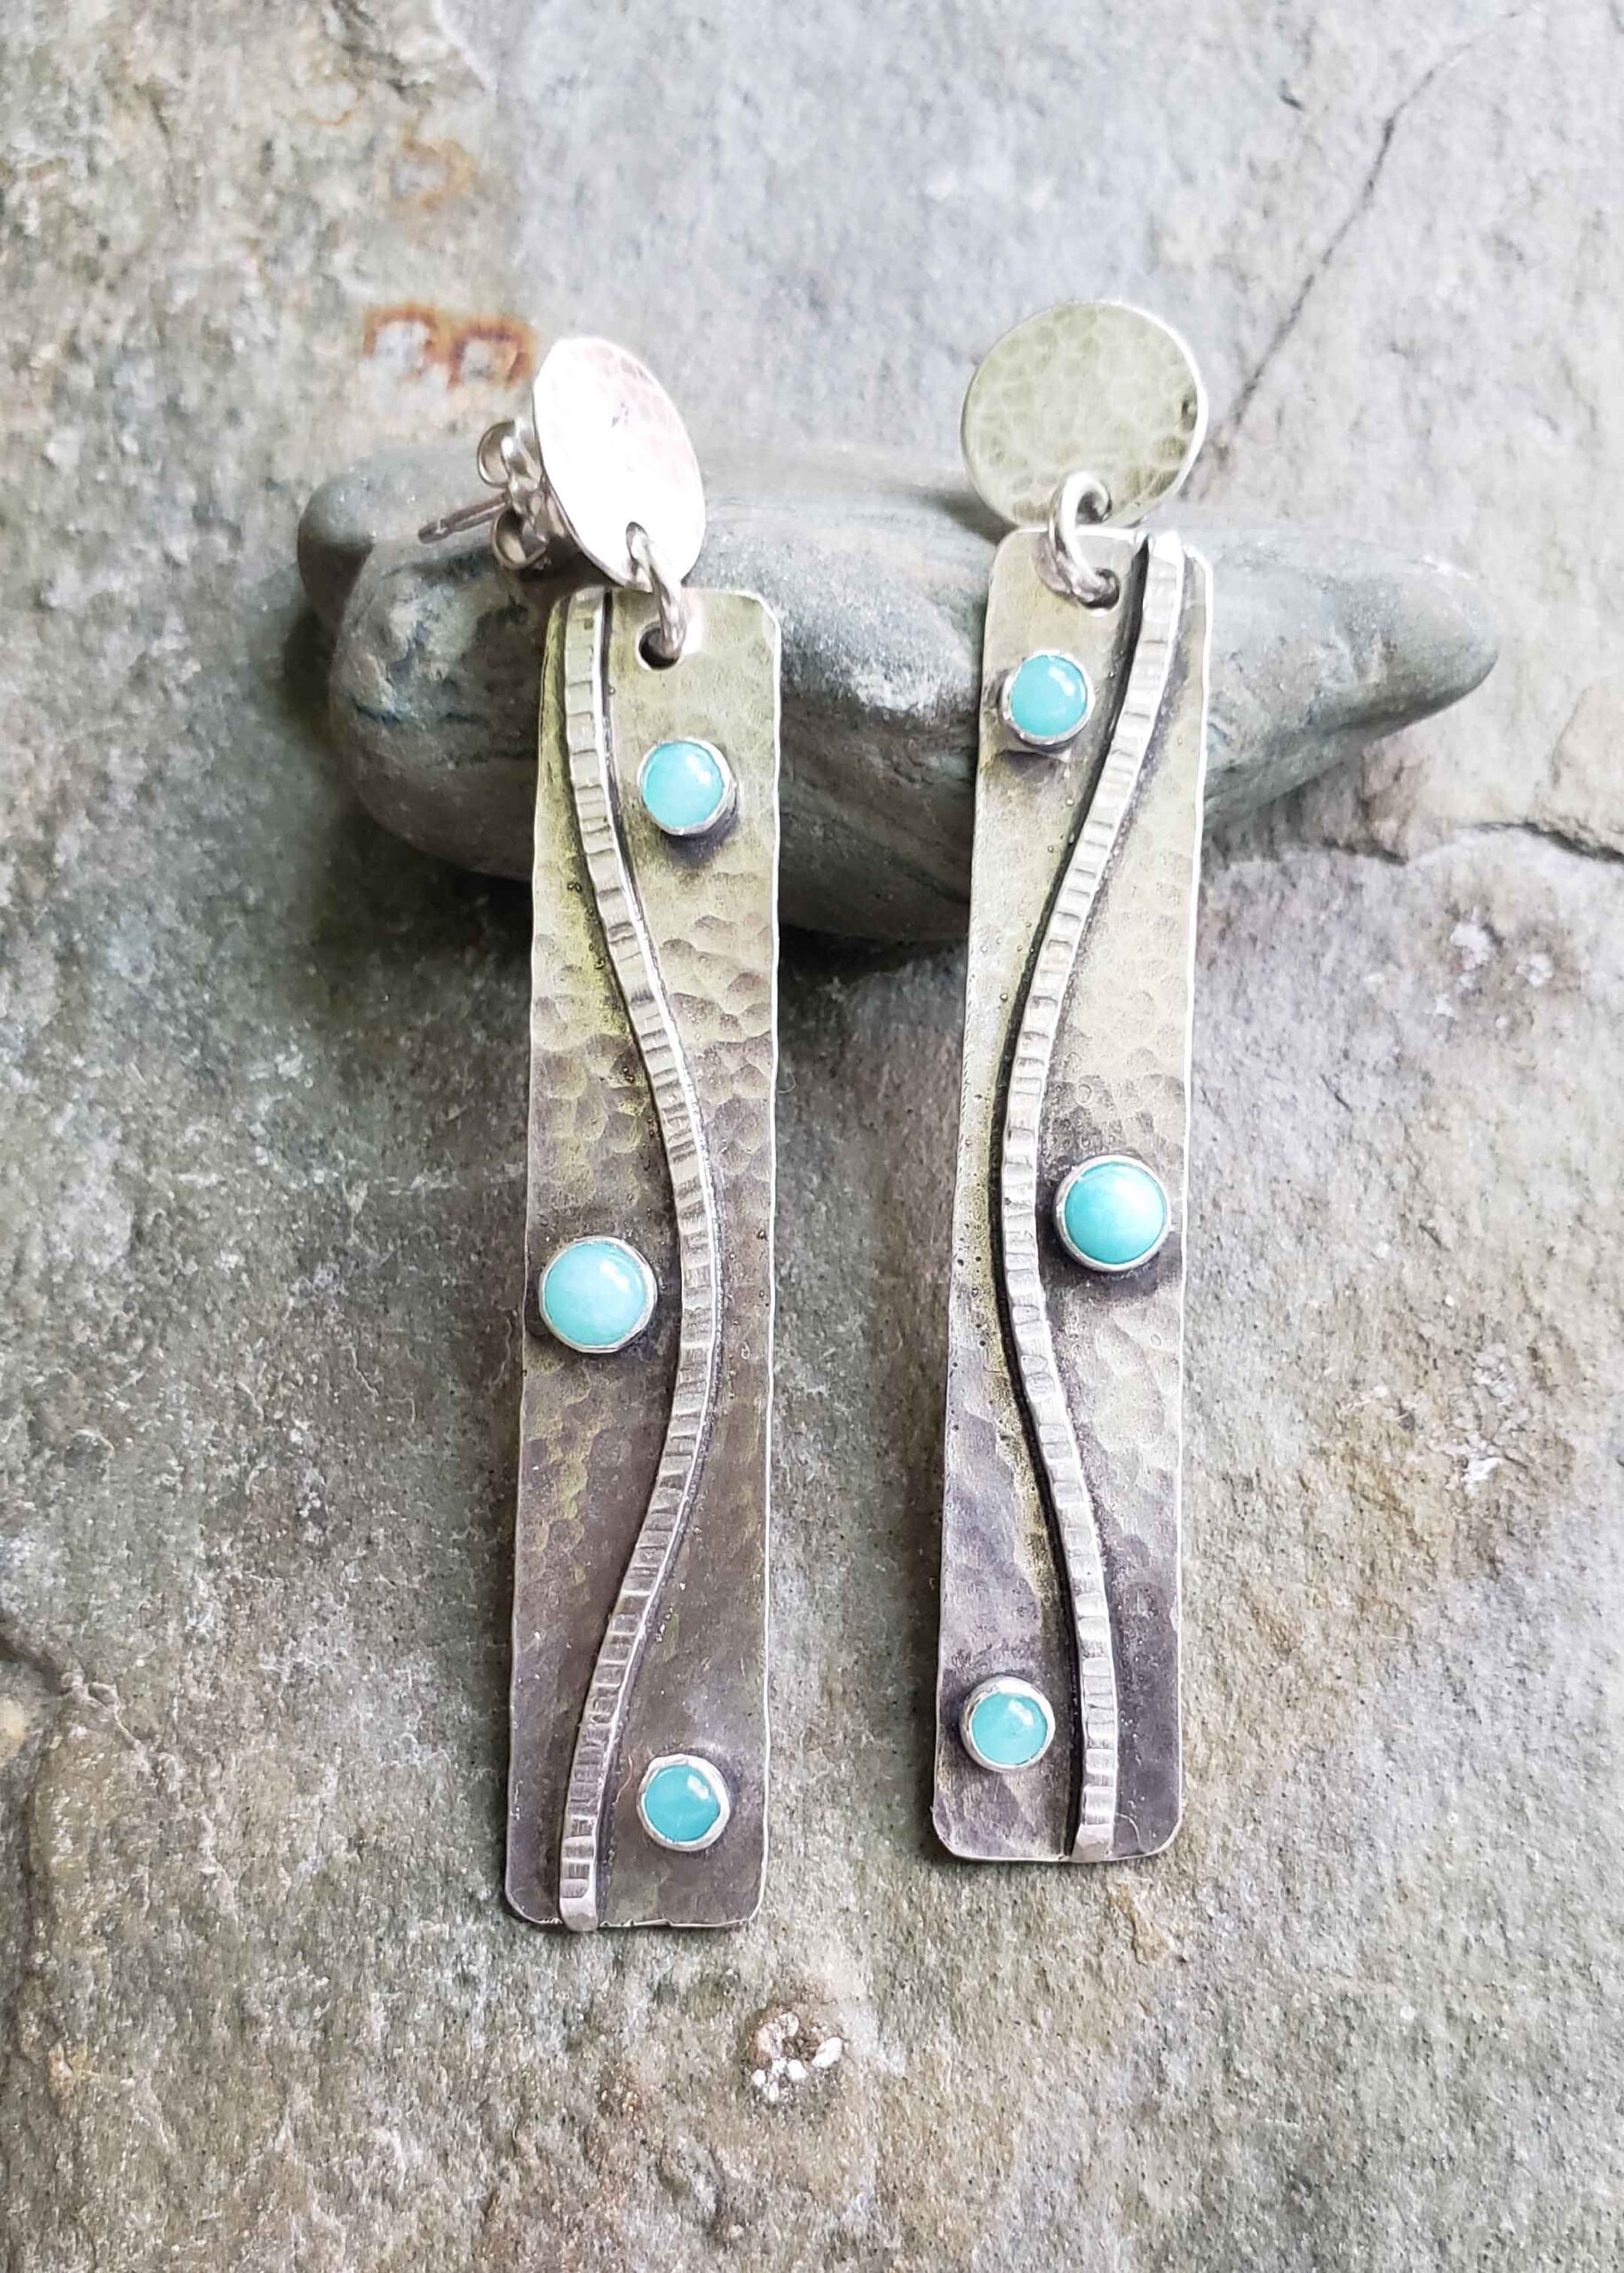 spring fling - silver and amazonite post earrings. Dona Miller Designs, LLC